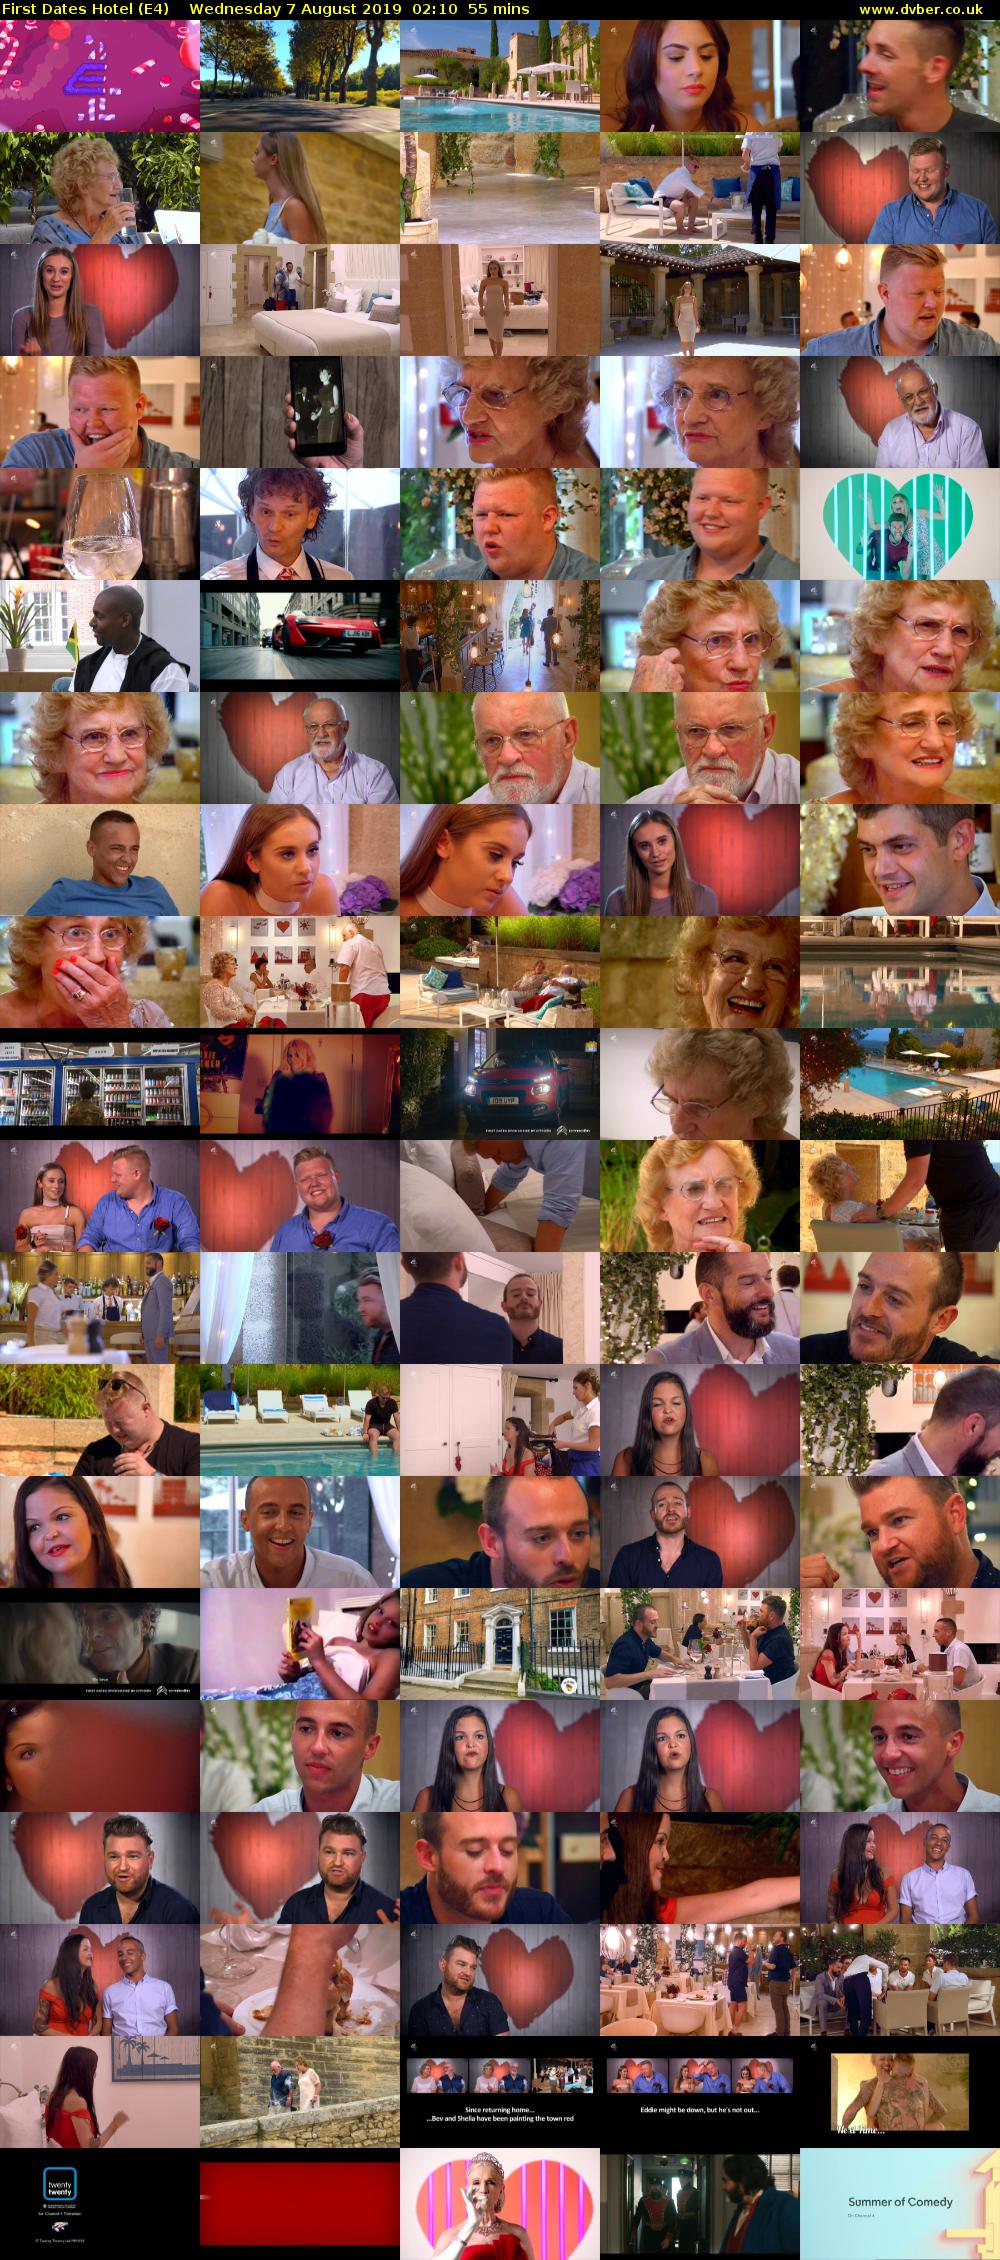 First Dates Hotel (E4) Wednesday 7 August 2019 02:10 - 03:05